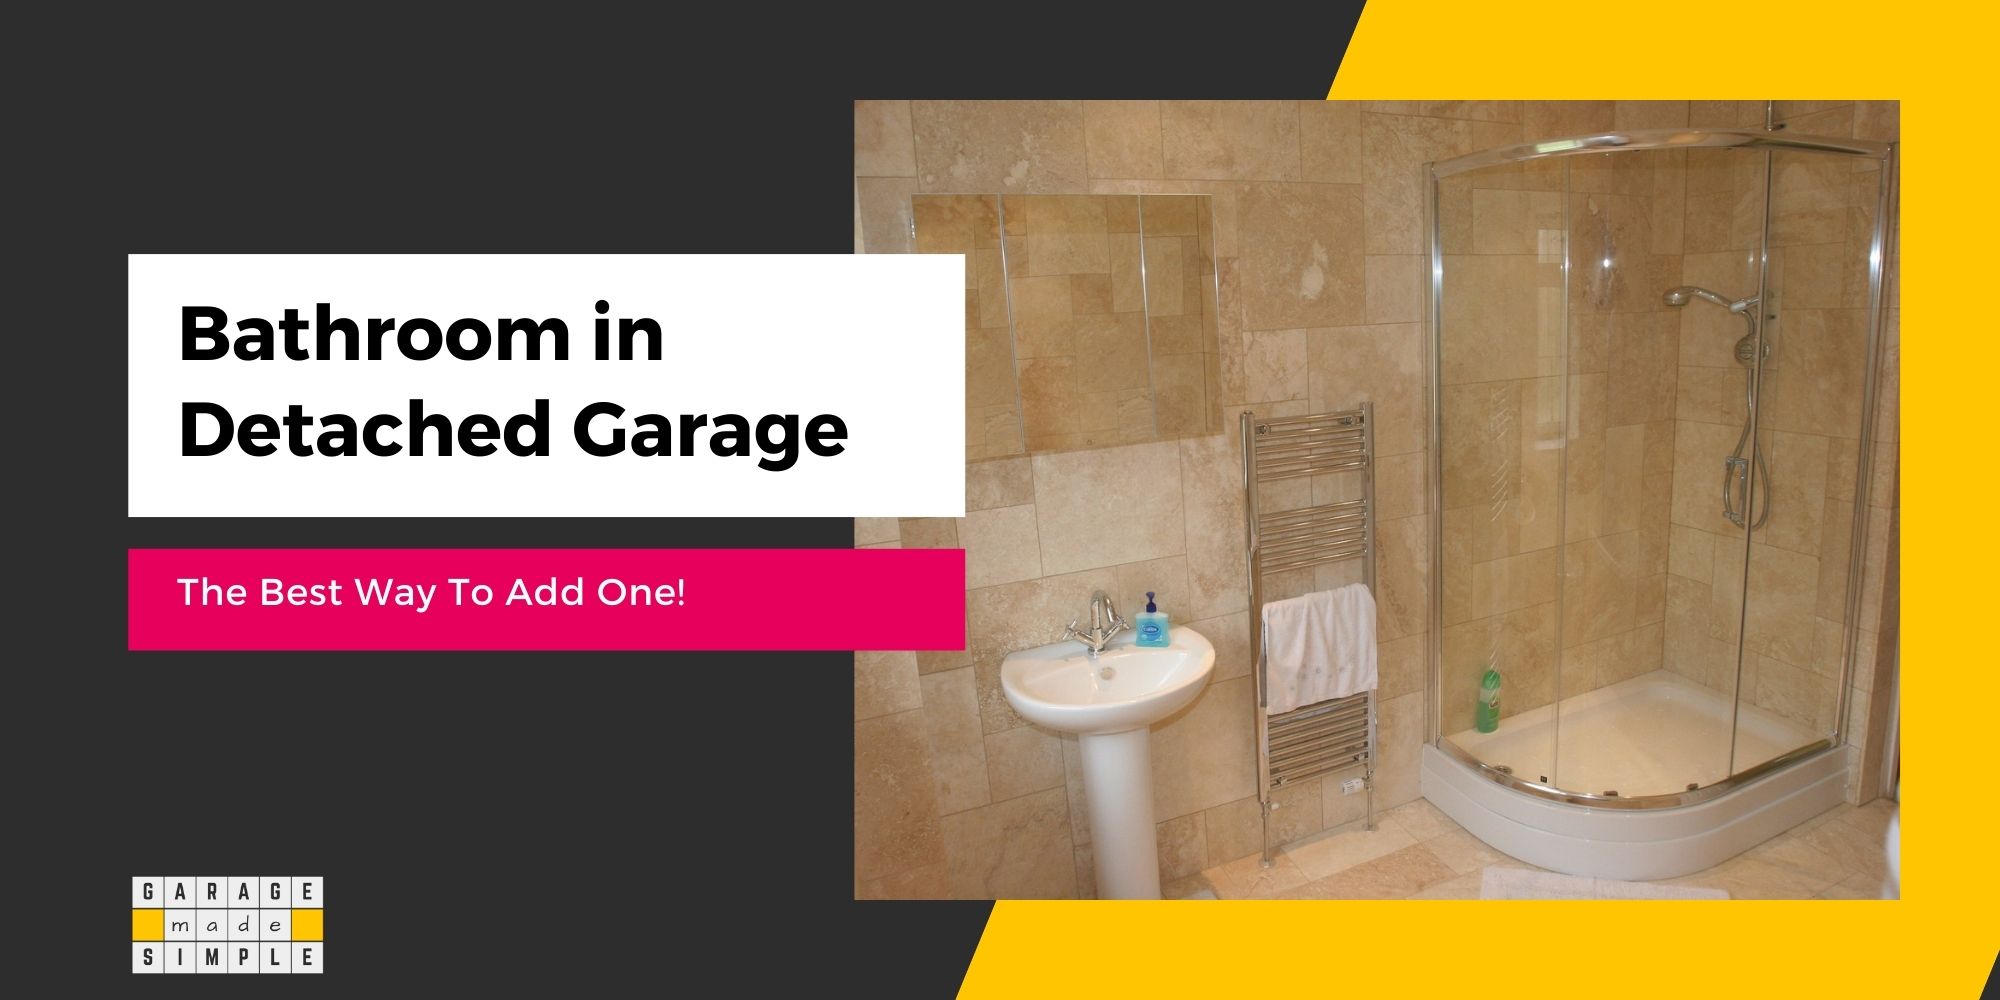 The Best Way of Adding A Bathroom In Your Detached Garage (in 7 Steps!)